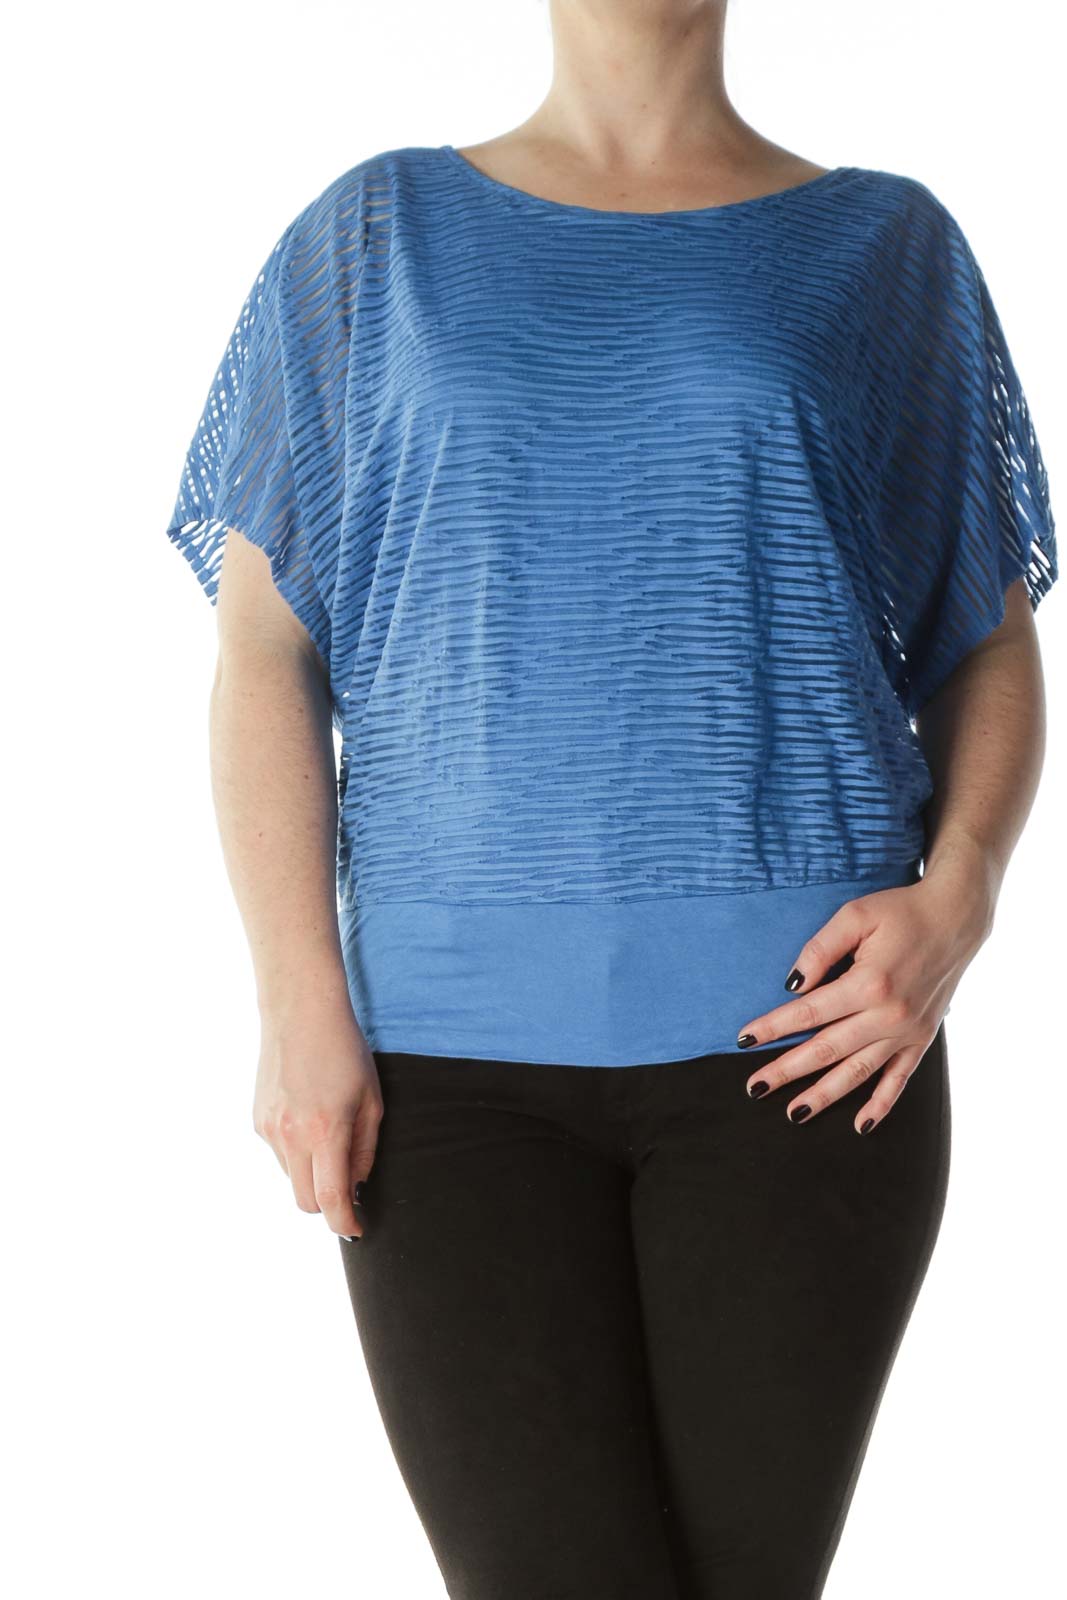 Blue Striped Translucent Over-Sized Bat-Sleeve Tee Front